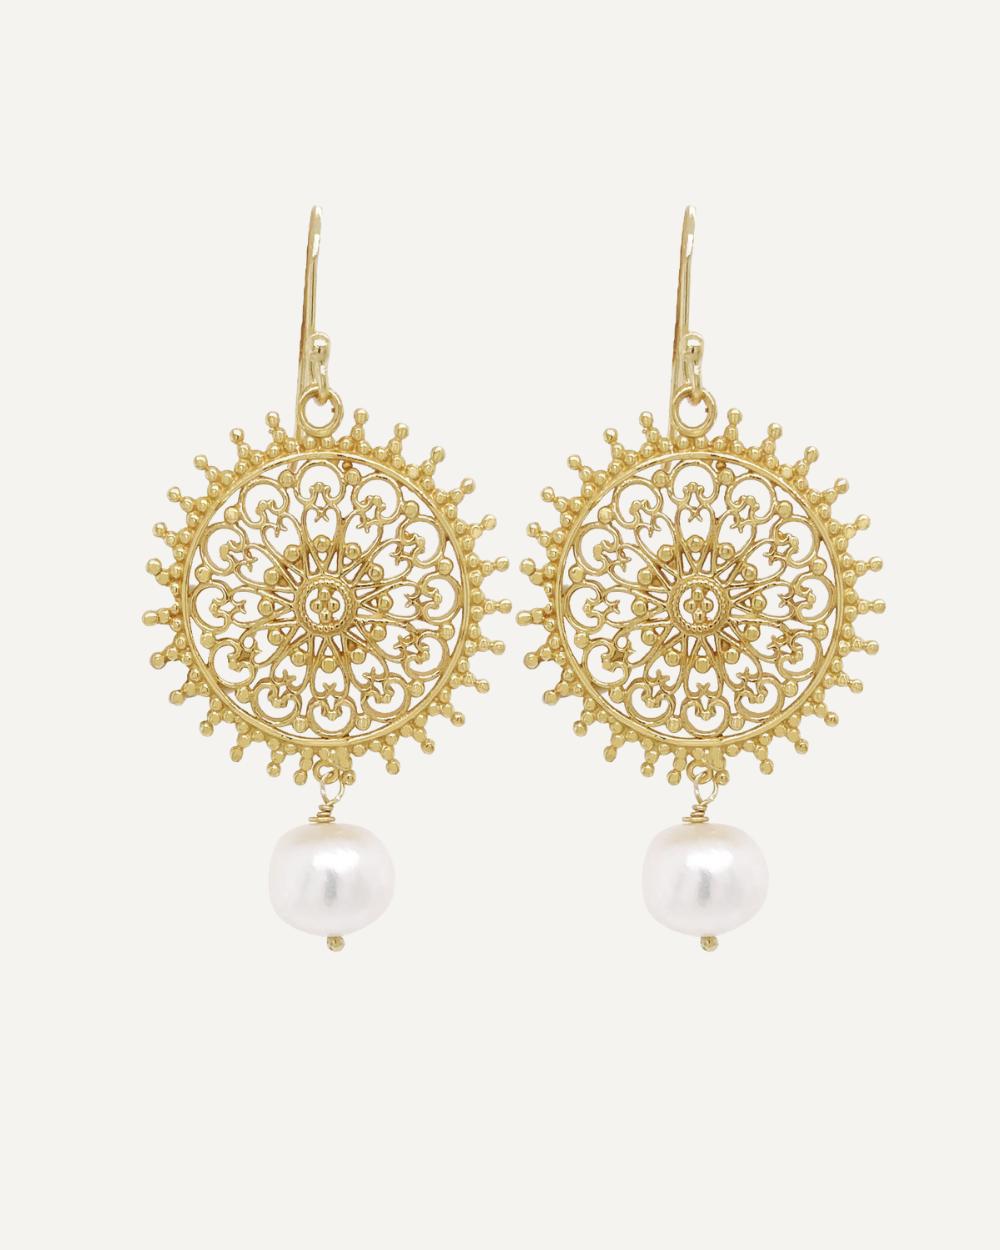 Statement earrings golden mandala shape with white baroque pearl drop on cream background.